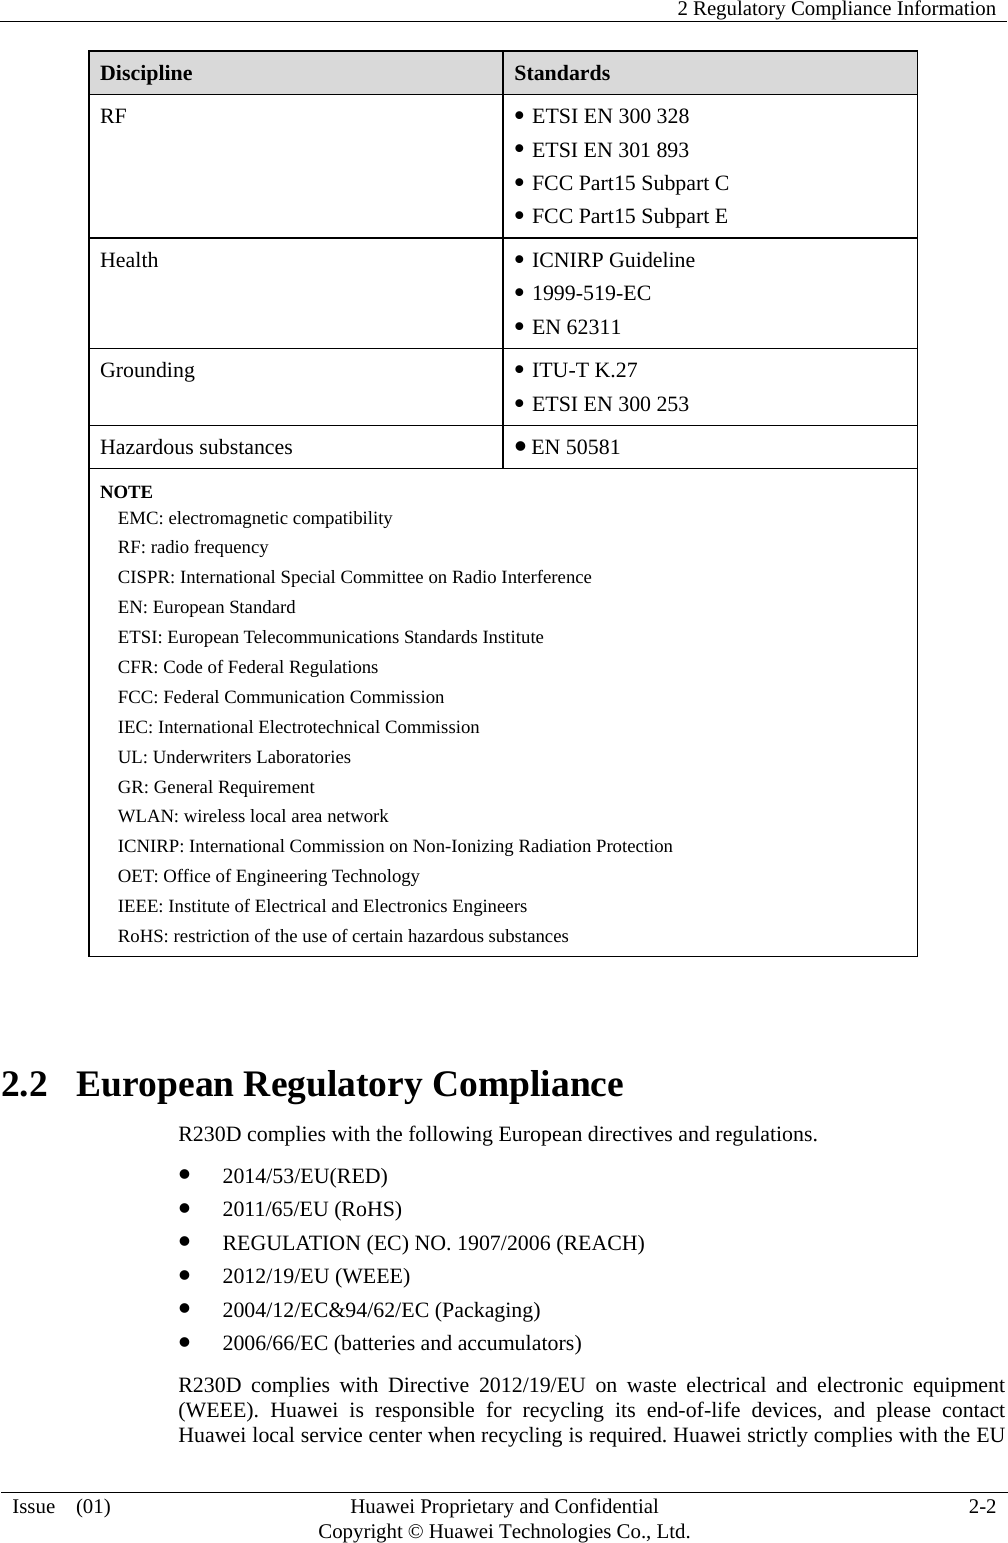    2 Regulatory Compliance Information  Issue  (01)  Huawei Proprietary and Confidential     Copyright © Huawei Technologies Co., Ltd. 2-2 Discipline  Standards RF  z ETSI EN 300 328   z ETSI EN 301 893 z FCC Part15 Subpart C z FCC Part15 Subpart E Health  z ICNIRP Guideline z 1999-519-EC z EN 62311 Grounding  z ITU-T K.27 z ETSI EN 300 253 Hazardous substances  z EN 50581 NOTE EMC: electromagnetic compatibility RF: radio frequency CISPR: International Special Committee on Radio Interference EN: European Standard ETSI: European Telecommunications Standards Institute CFR: Code of Federal Regulations FCC: Federal Communication Commission IEC: International Electrotechnical Commission UL: Underwriters Laboratories GR: General Requirement WLAN: wireless local area network ICNIRP: International Commission on Non-Ionizing Radiation Protection OET: Office of Engineering Technology IEEE: Institute of Electrical and Electronics Engineers RoHS: restriction of the use of certain hazardous substances  2.2   European Regulatory Compliance R230D complies with the following European directives and regulations. z 2014/53/EU(RED) z 2011/65/EU (RoHS) z REGULATION (EC) NO. 1907/2006 (REACH) z 2012/19/EU (WEEE) z 2004/12/EC&amp;94/62/EC (Packaging) z 2006/66/EC (batteries and accumulators) R230D complies with Directive 2012/19/EU on waste electrical and electronic equipment (WEEE). Huawei is responsible for recycling its end-of-life devices, and please contact Huawei local service center when recycling is required. Huawei strictly complies with the EU 